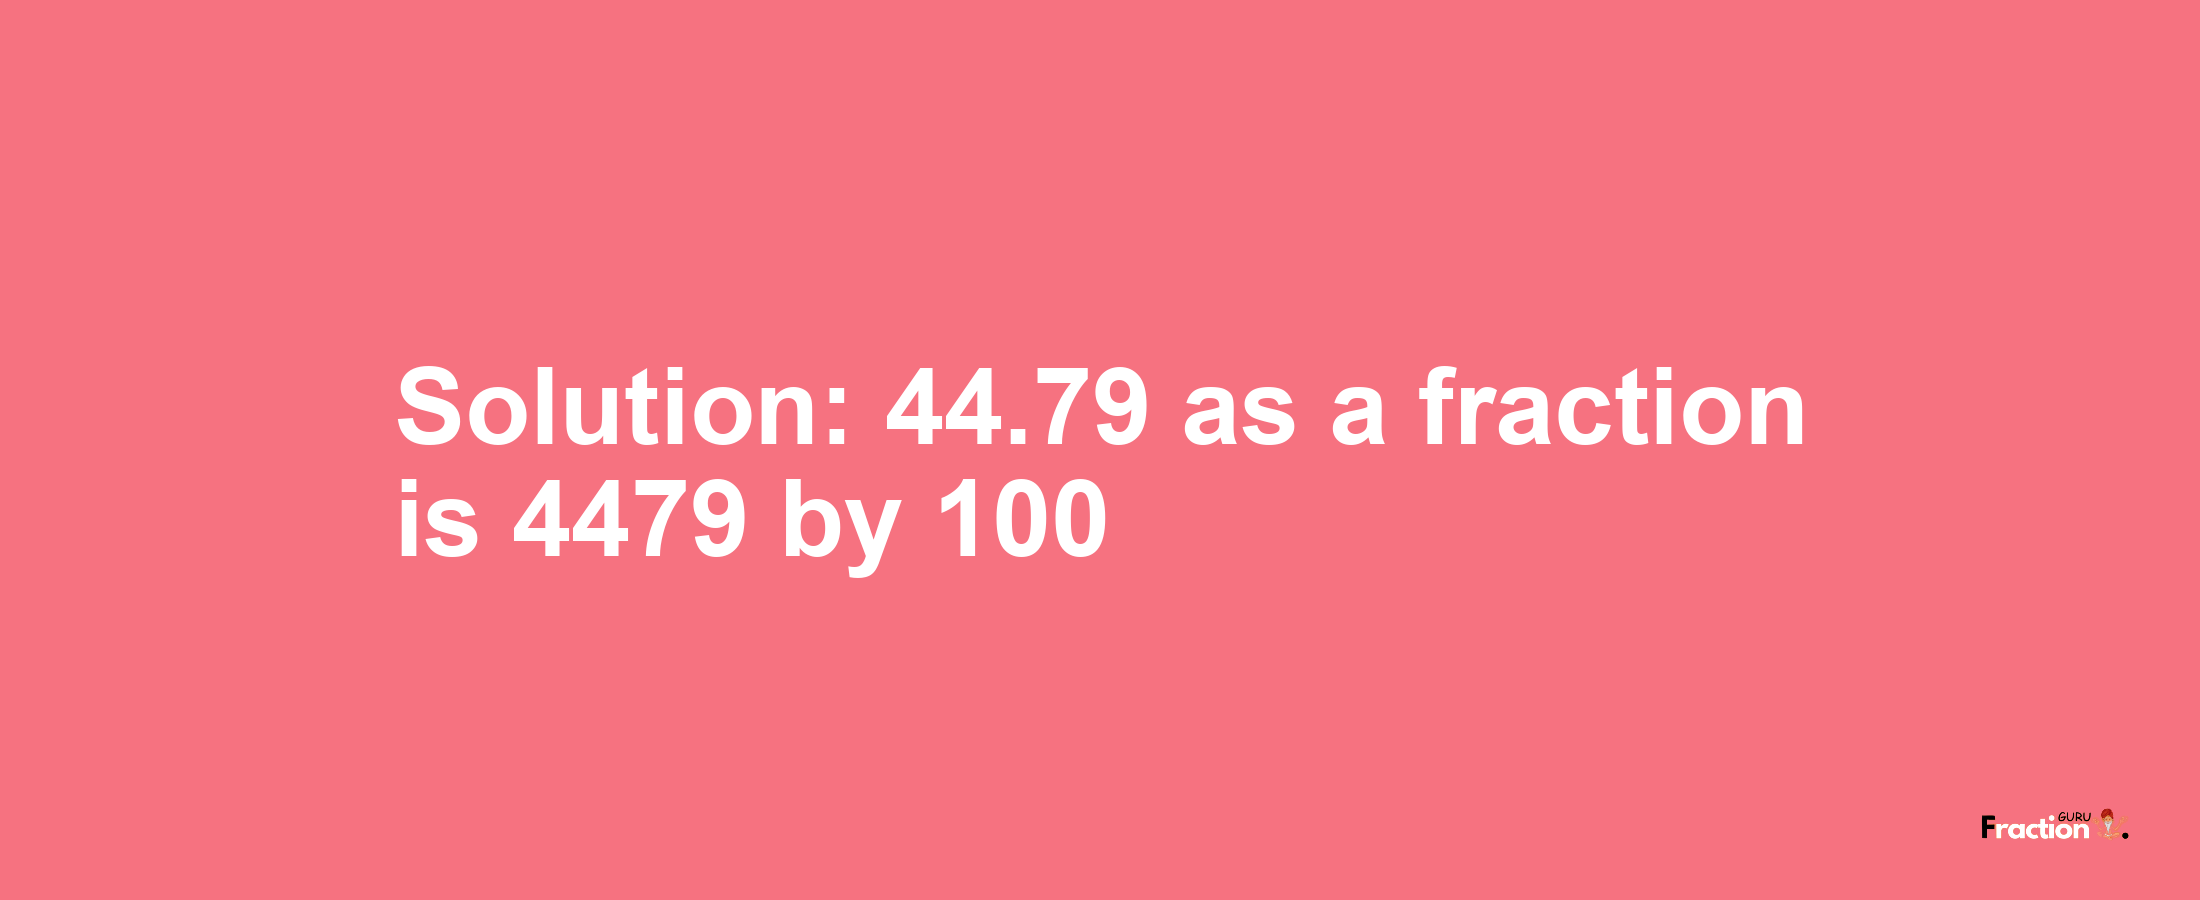 Solution:44.79 as a fraction is 4479/100